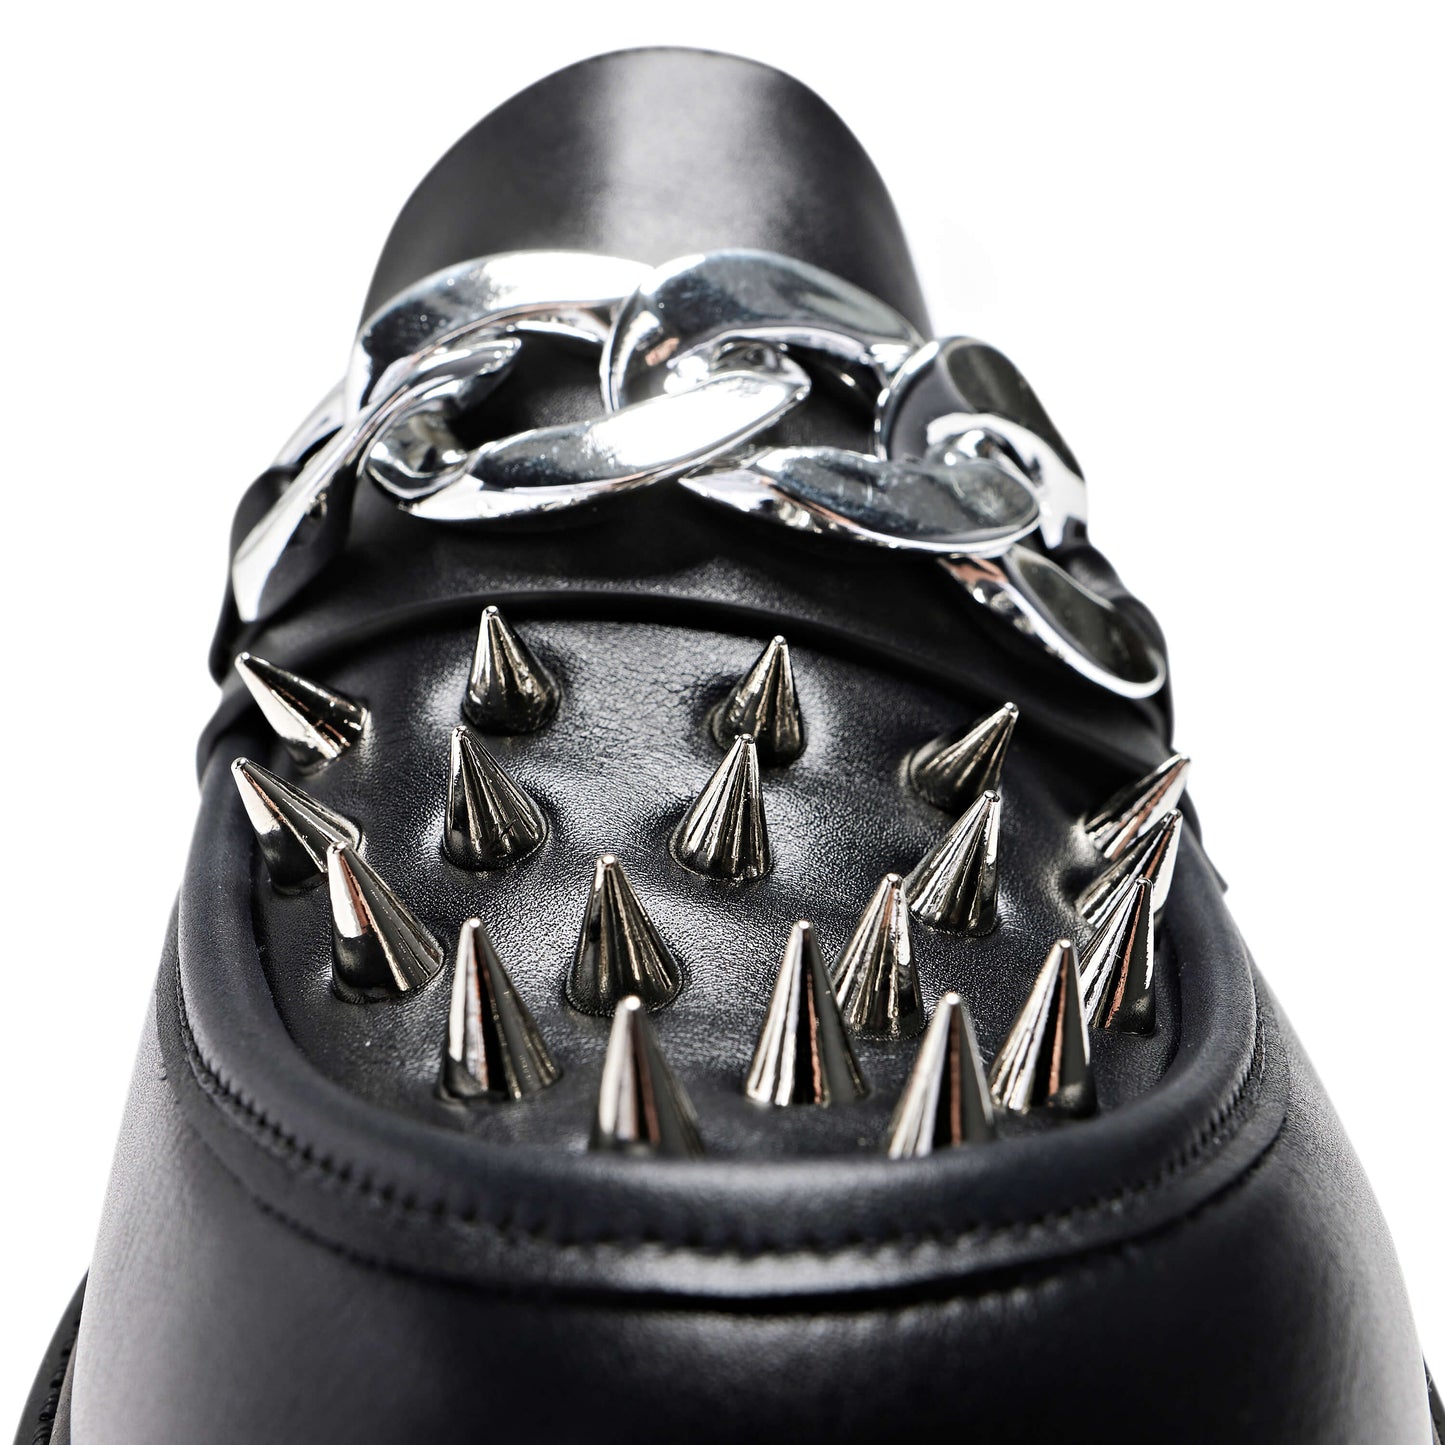 The Grave Warden Men's Spiked Loafers - Shoes - KOI Footwear - Black - Front Metal Detail